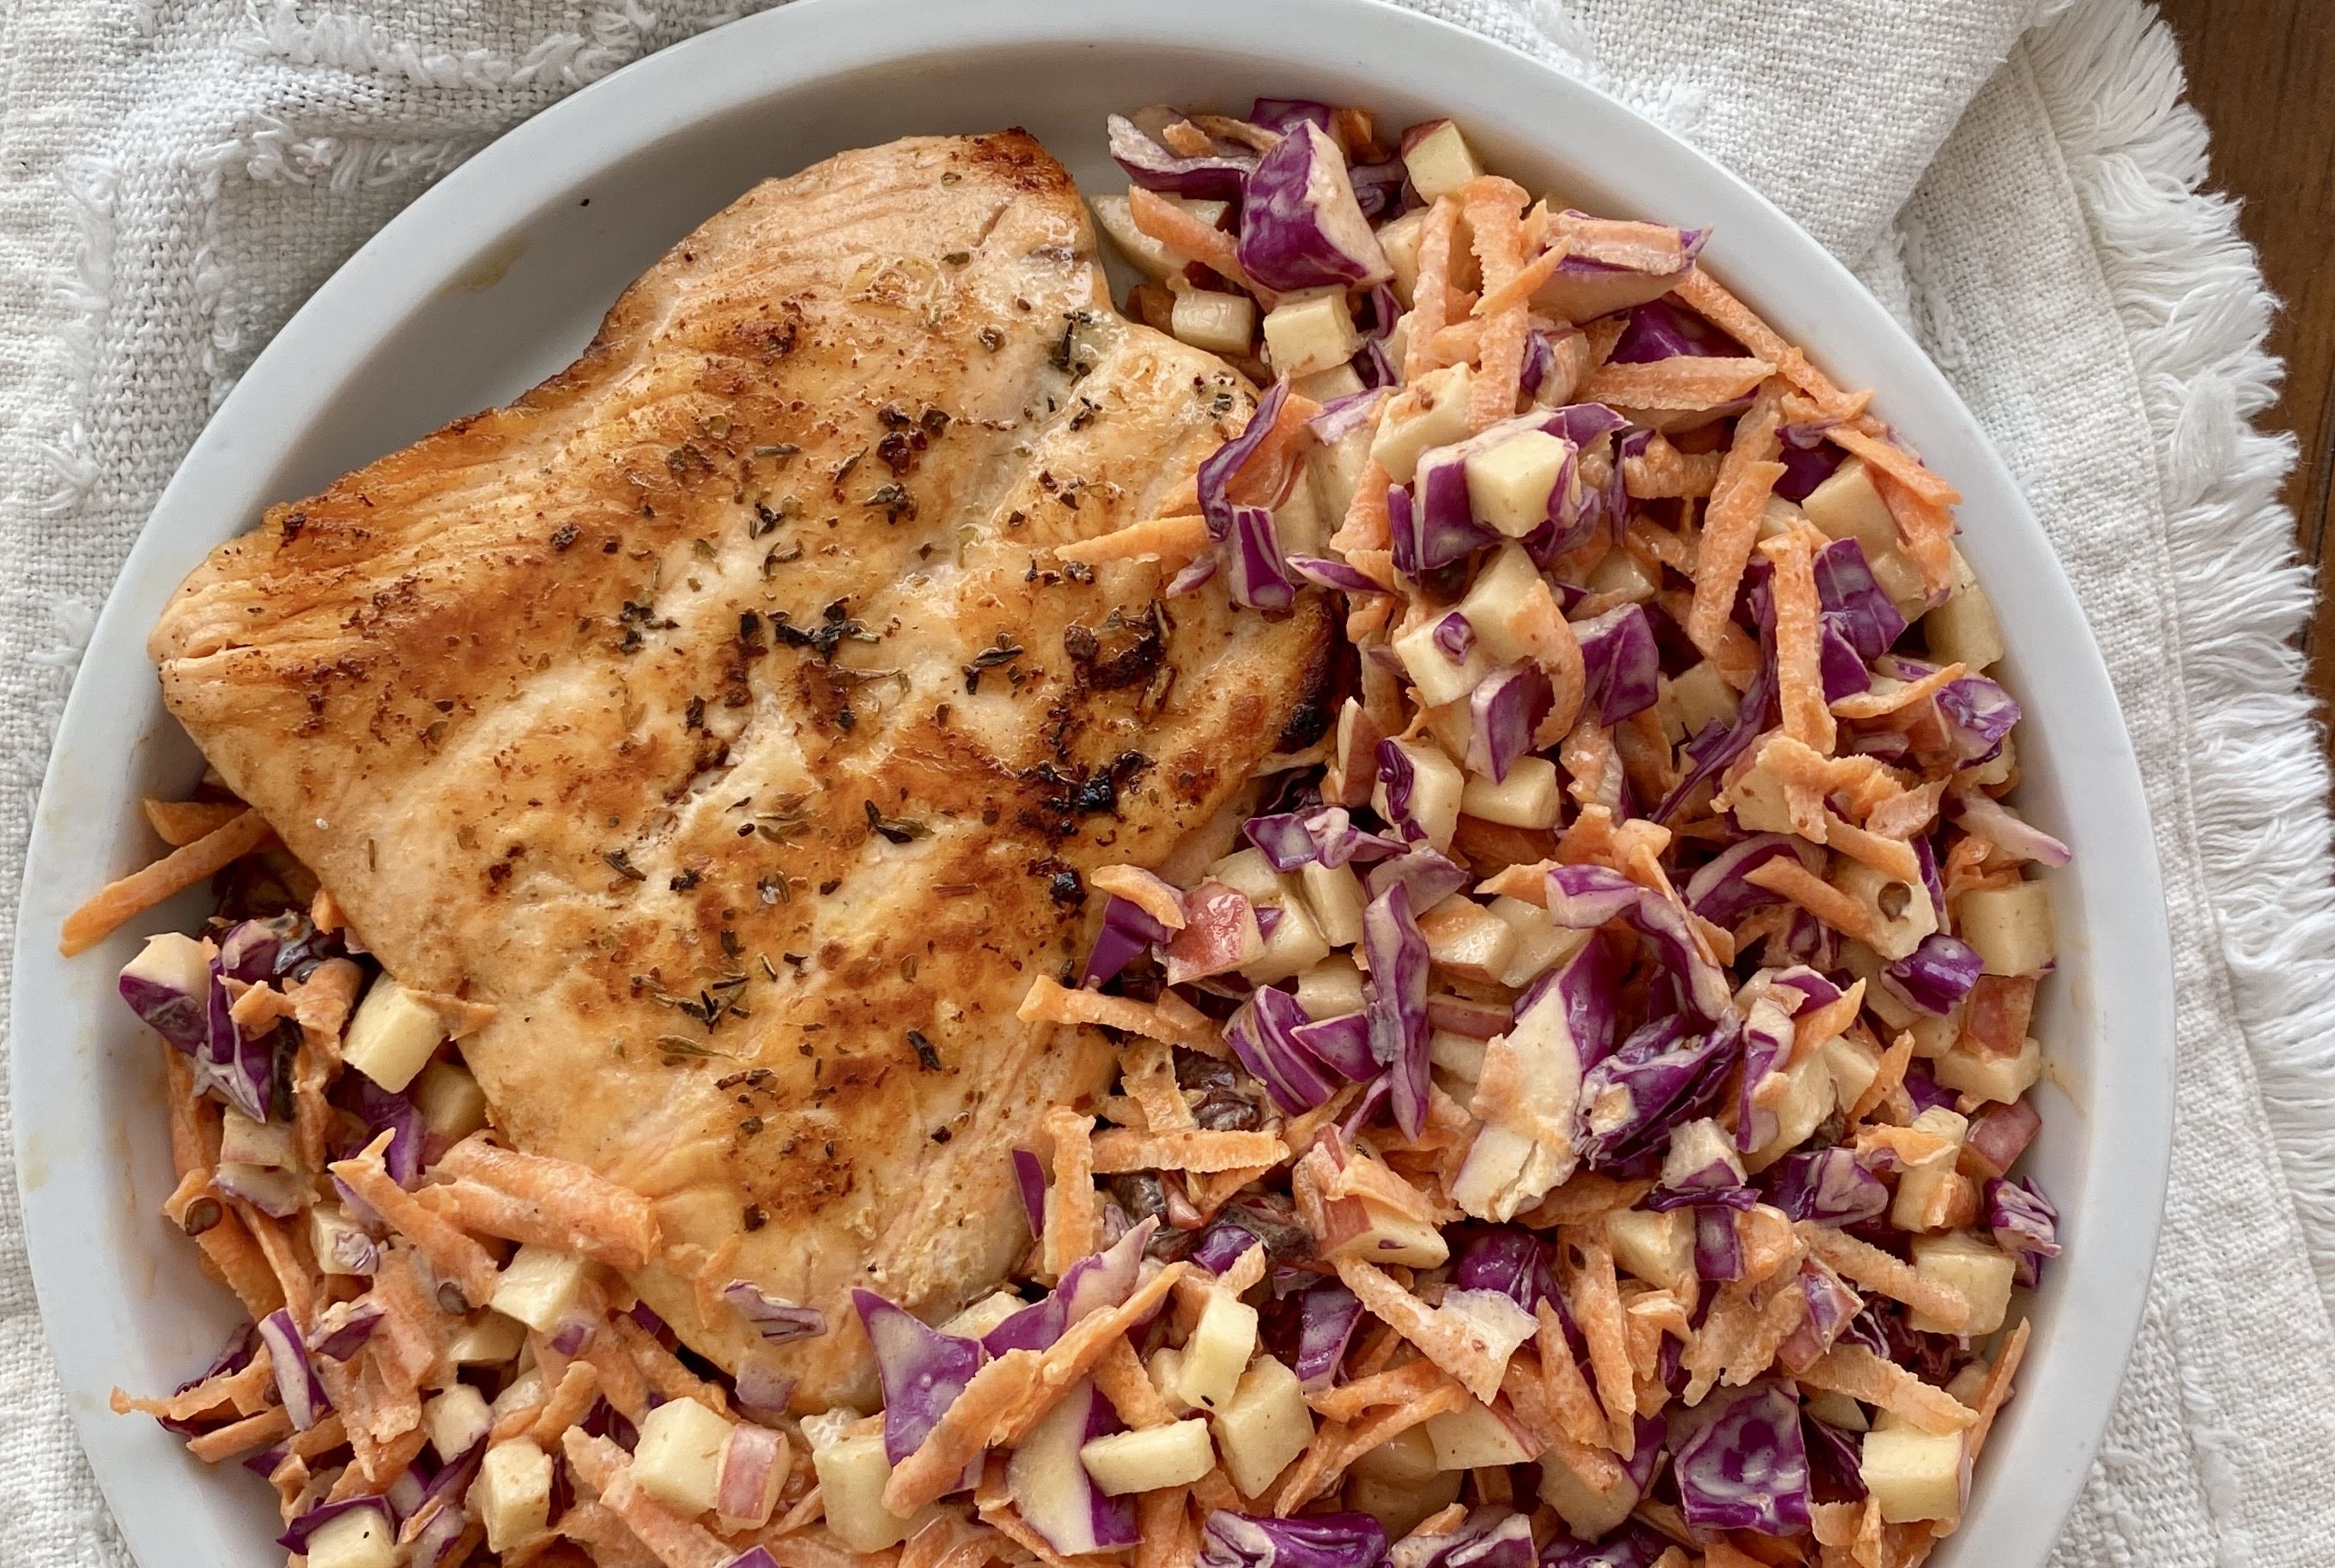 Salmon with red cabbage salad and tostadas